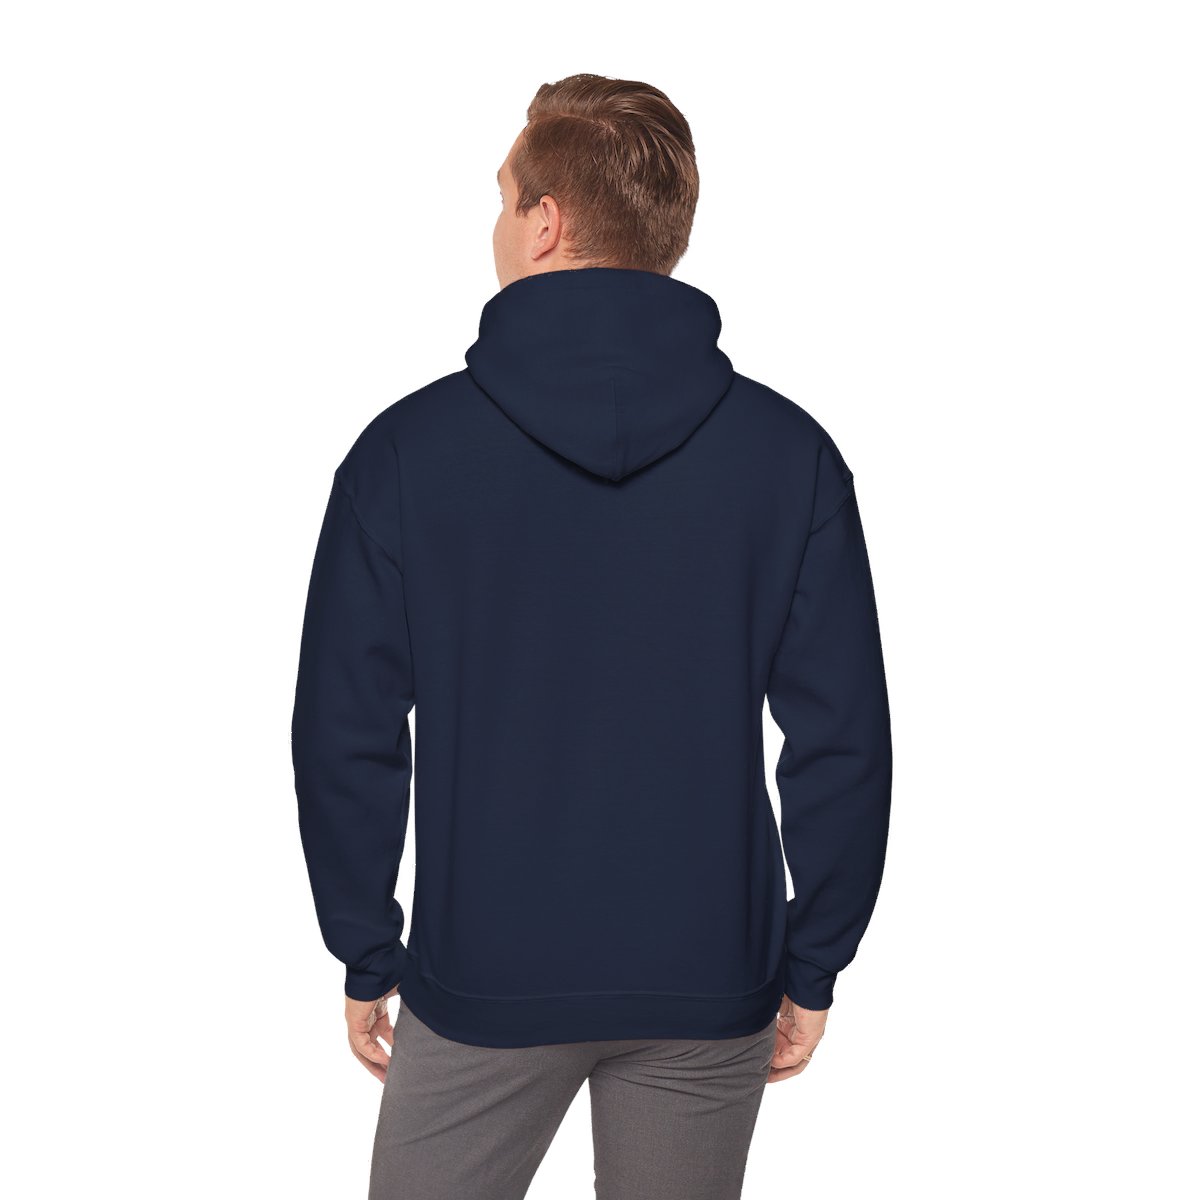 Catalyst "Alt Athletic" Hoodie product thumbnail image